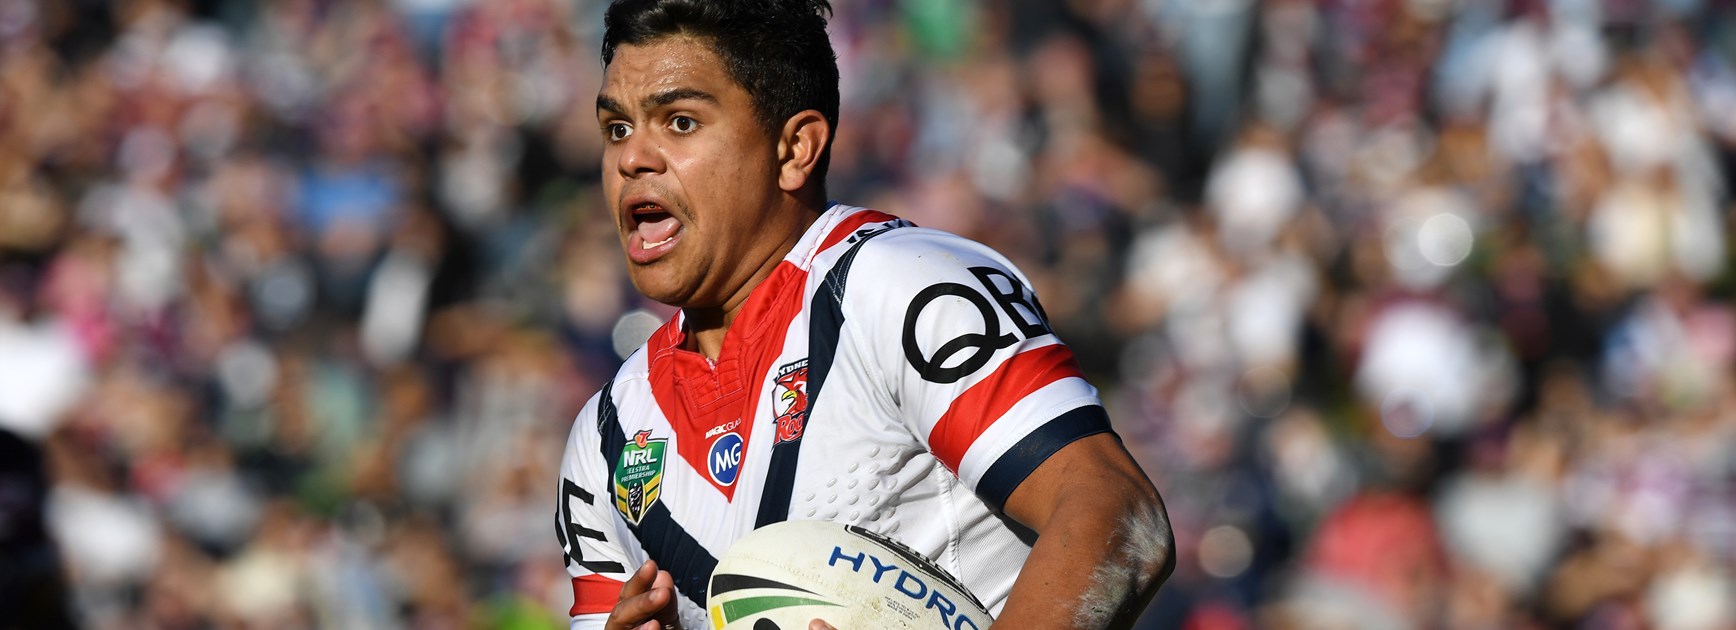 Roosters centre Latrell Mitchell.